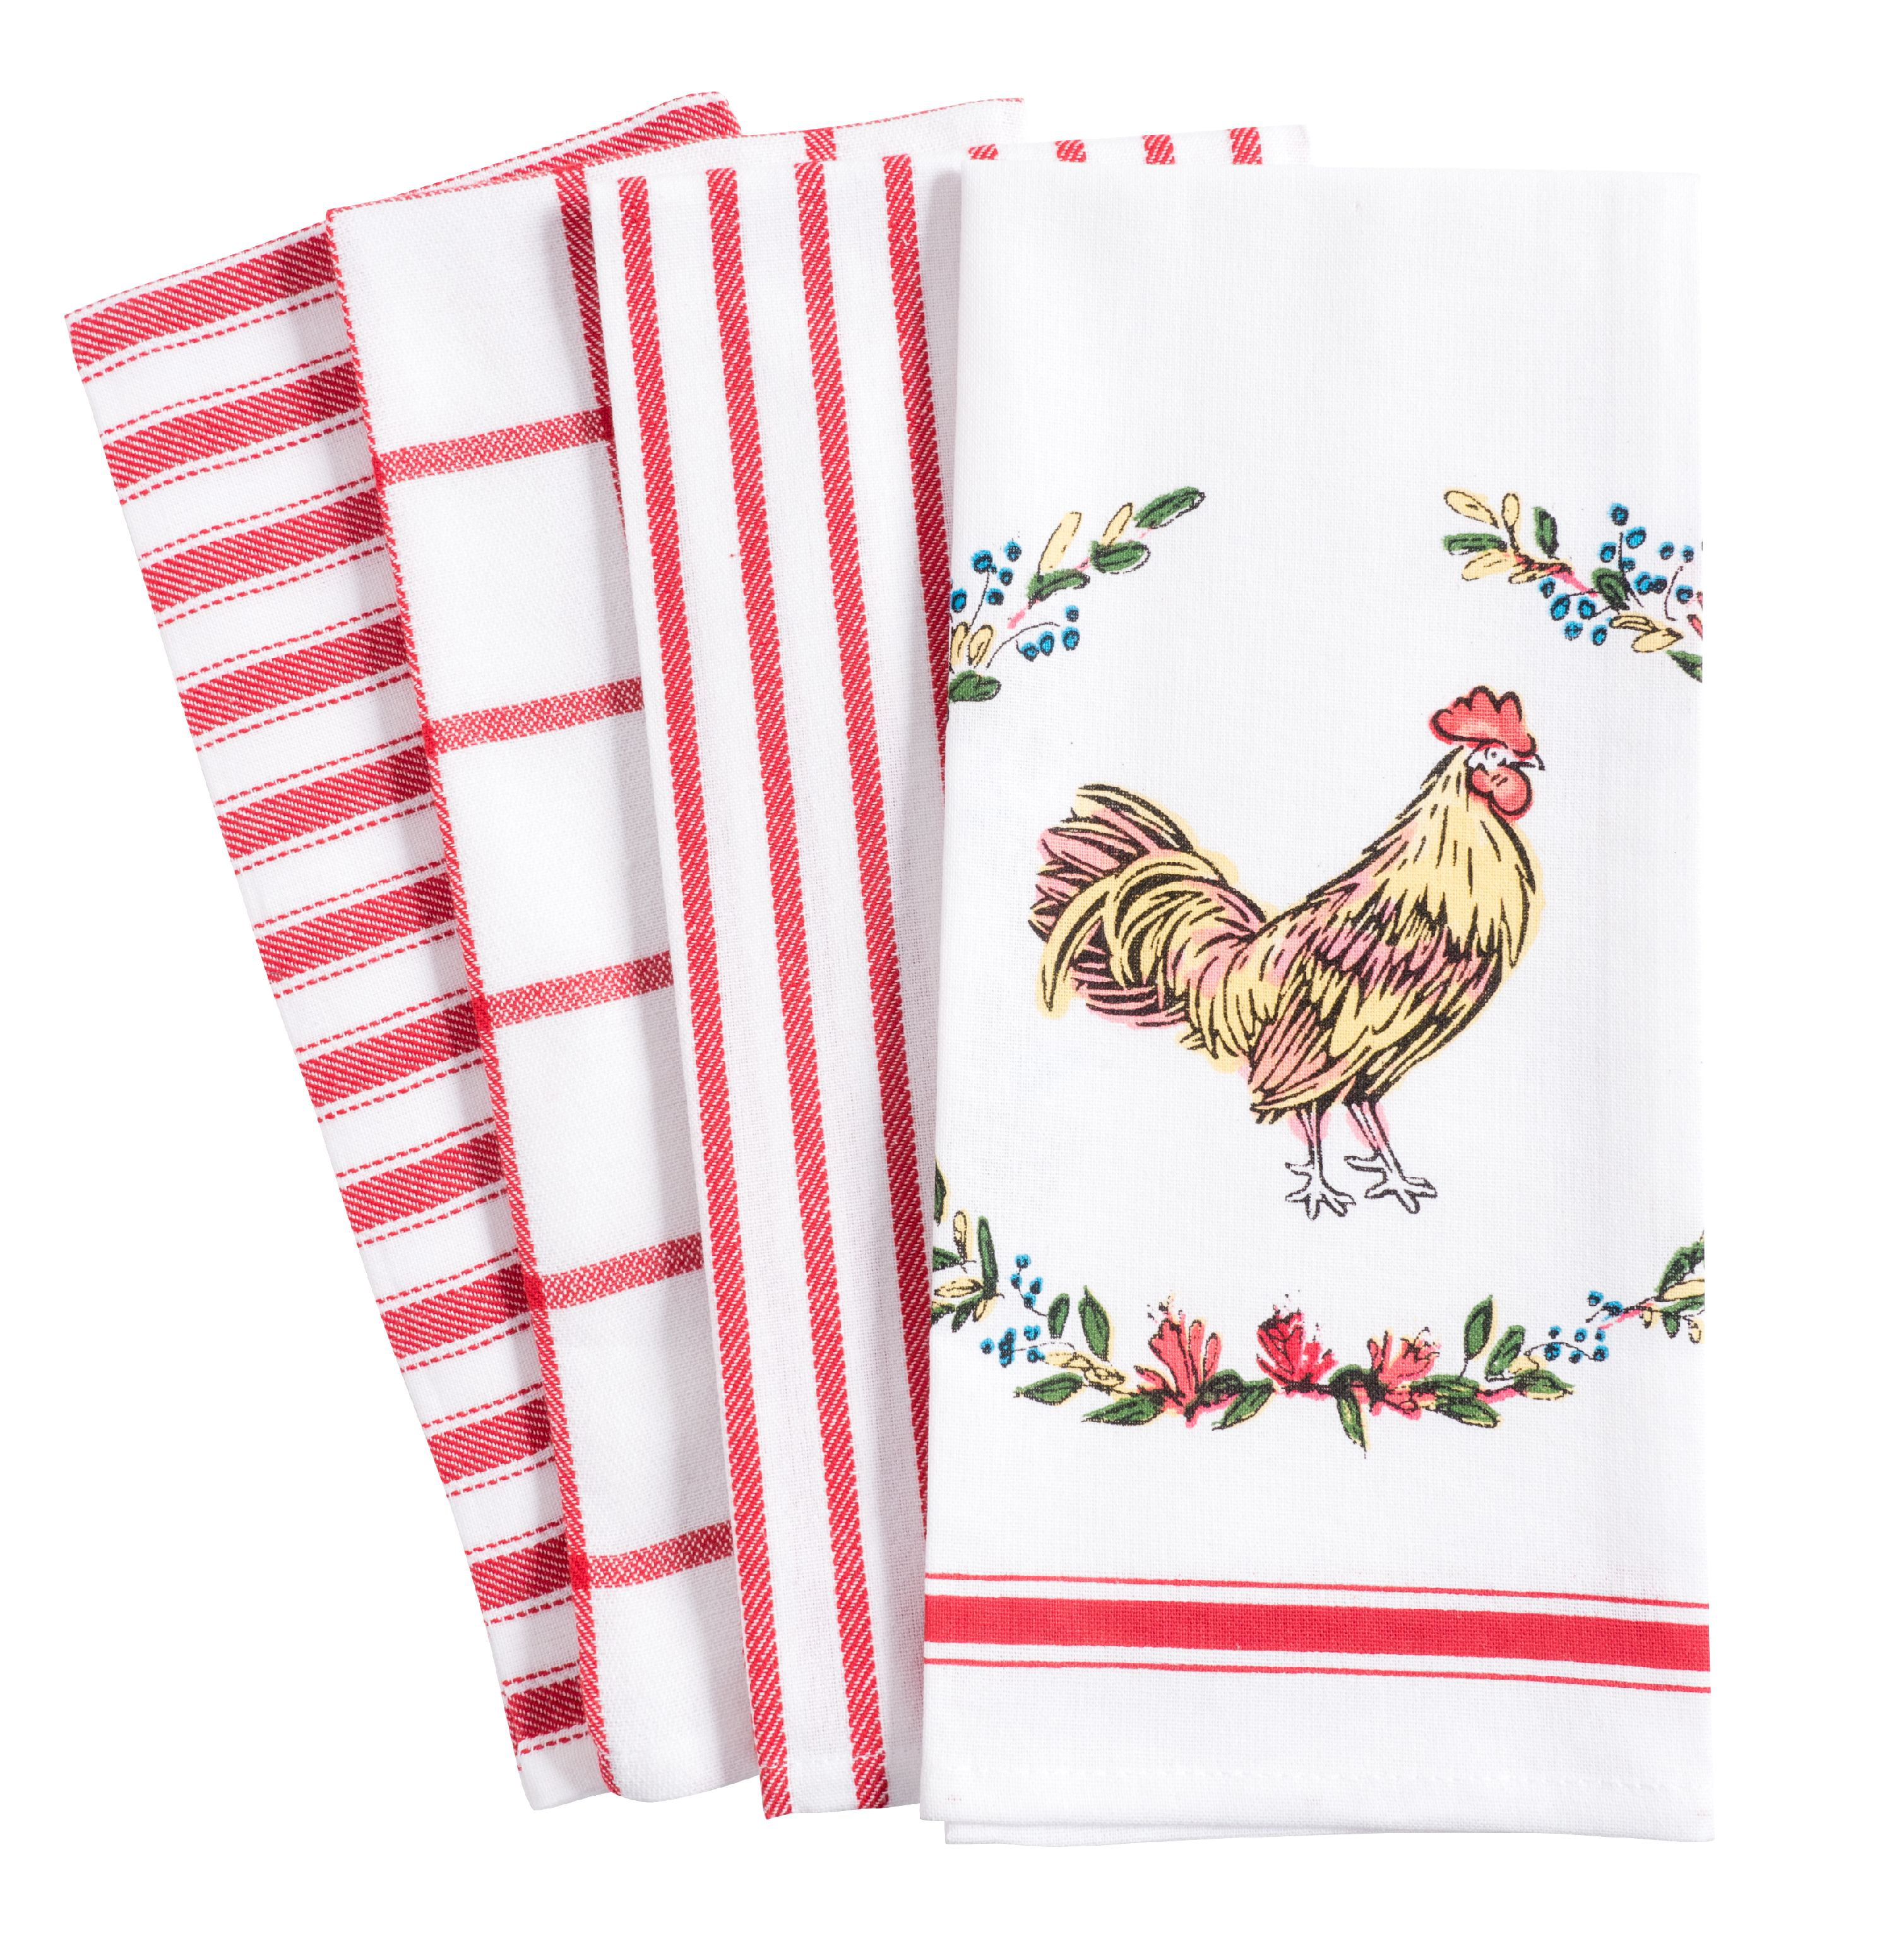 CaTaKu Farm Rooster Vintage Kitchen Dish Cloths, 6 Pack Reusable Dish Rags  for Washing Dishes, Microfiber Cleaning Cloths Dish Towels Washcloths for